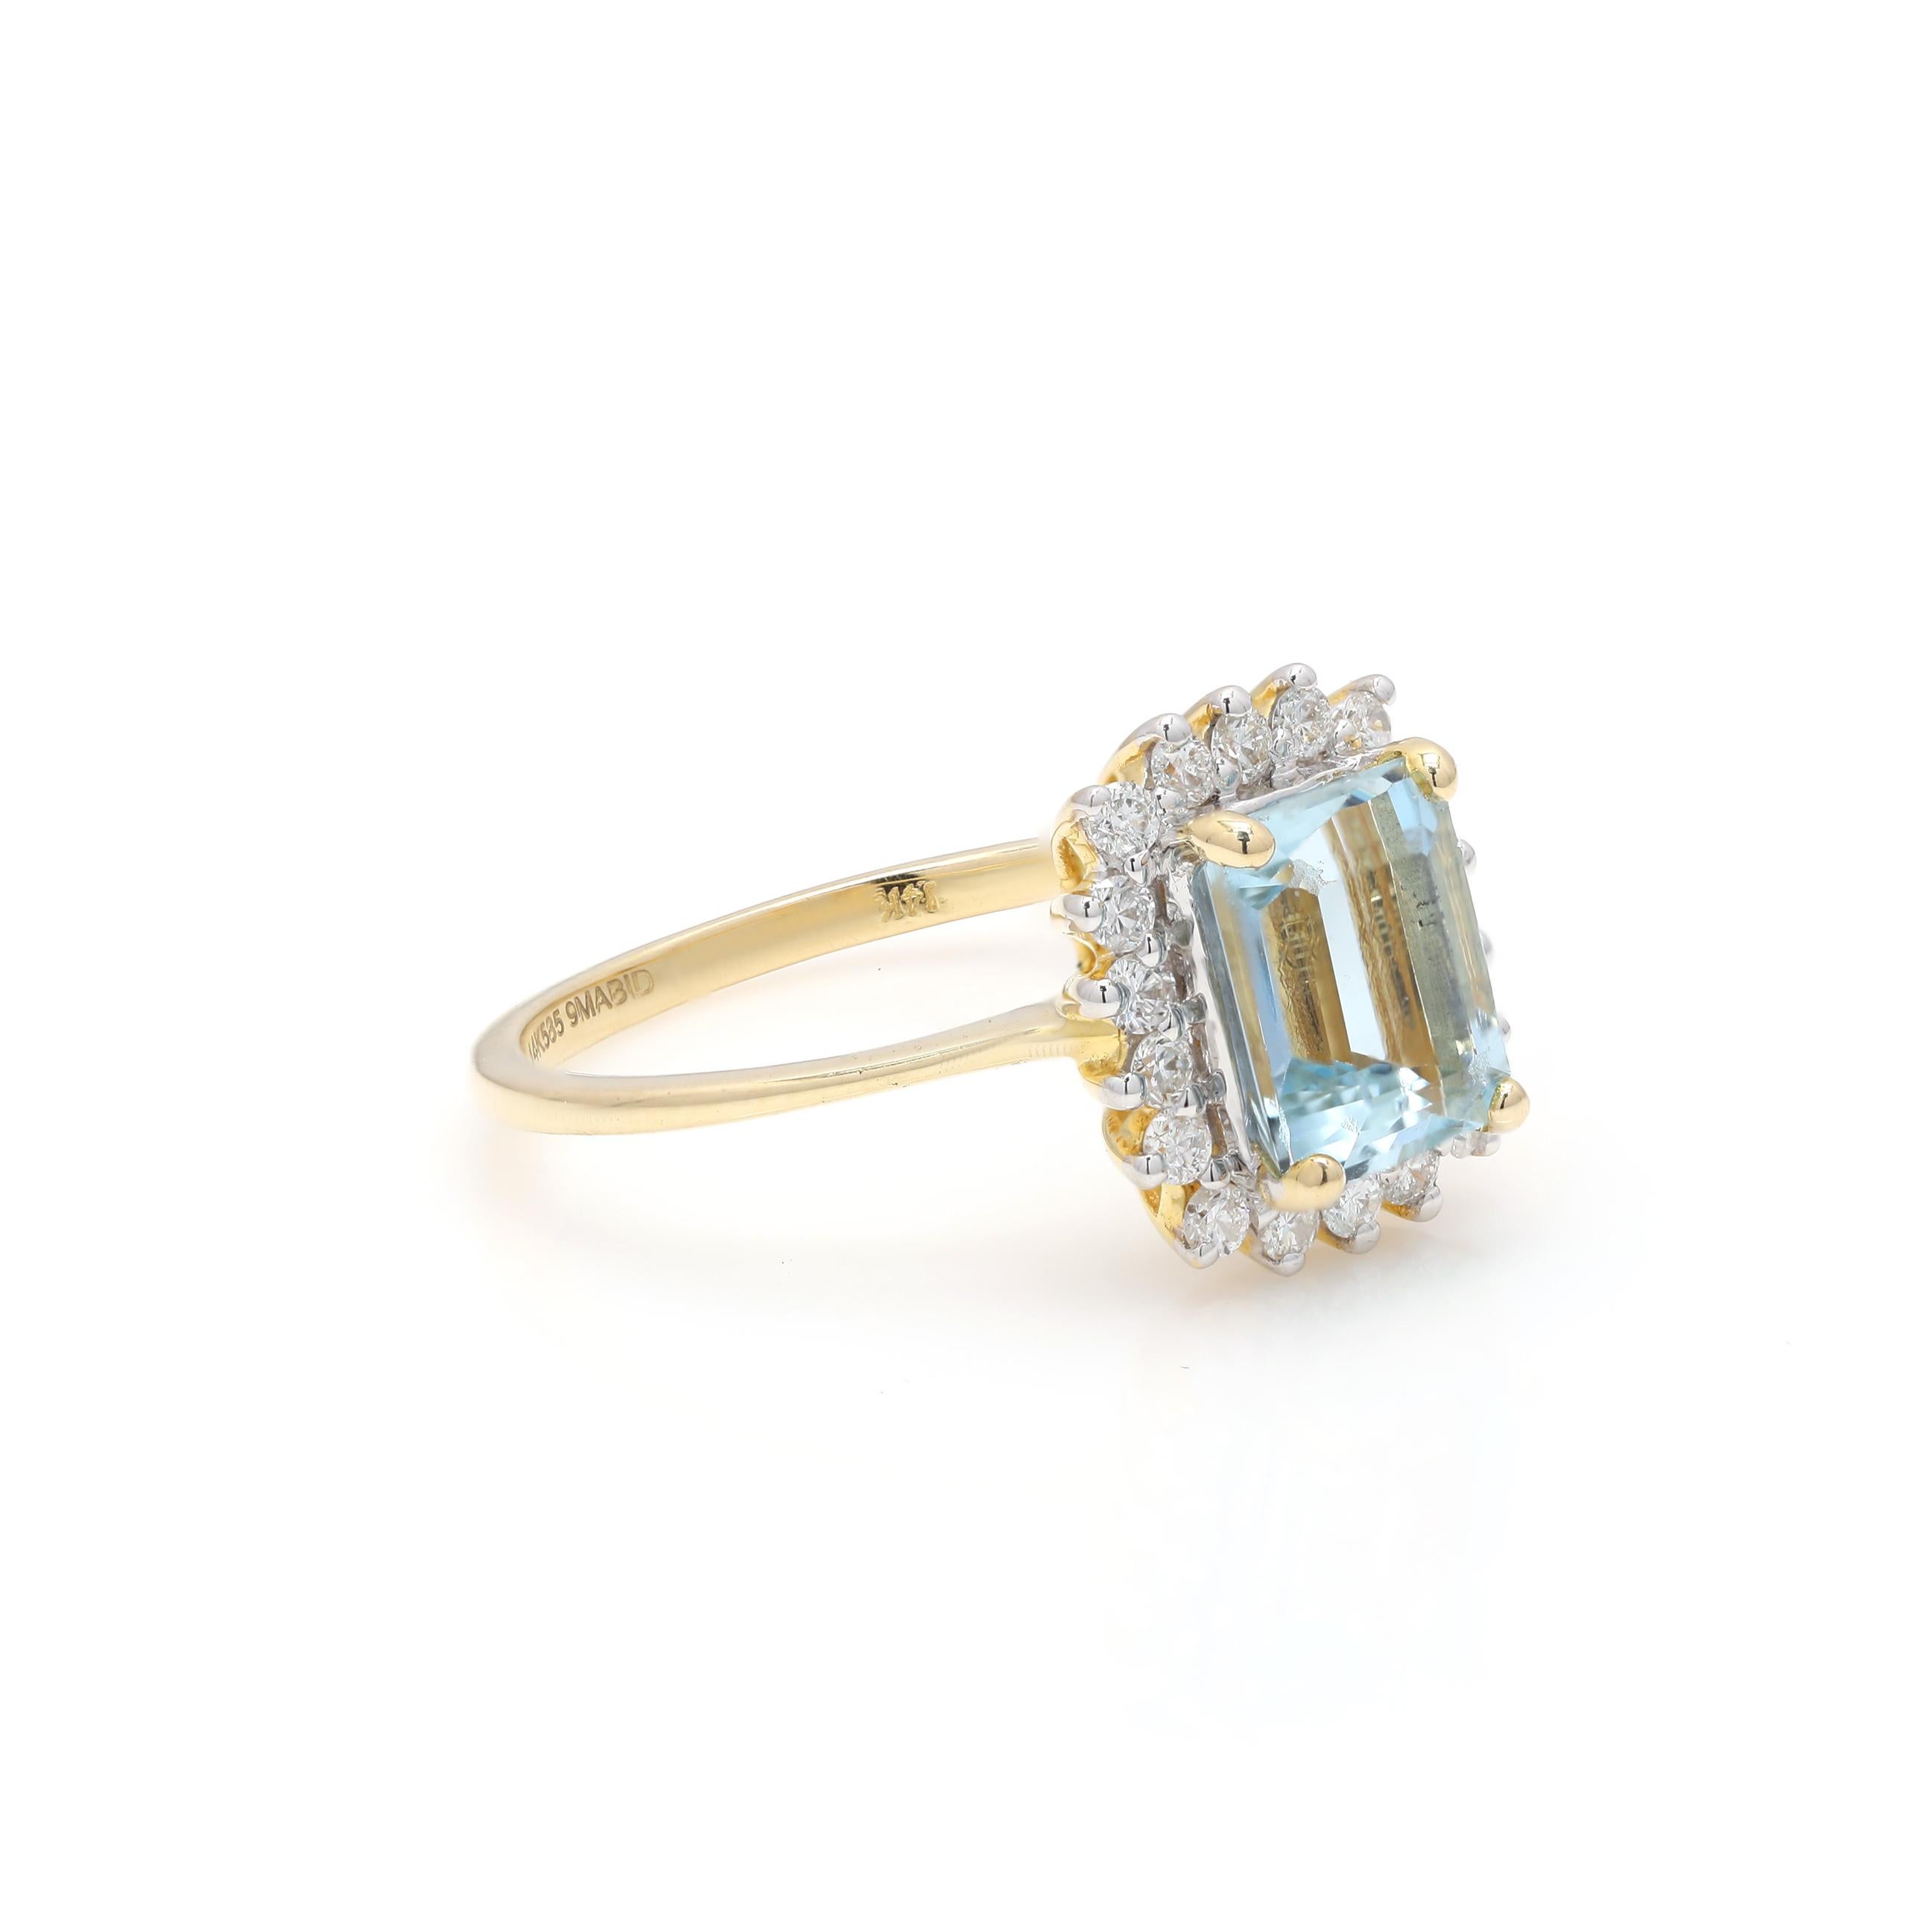 For Sale:  1.95 ct Octagon Cut Aquamarine Ring with Halo Diamond in 14kt Solid Yellow Gold 2